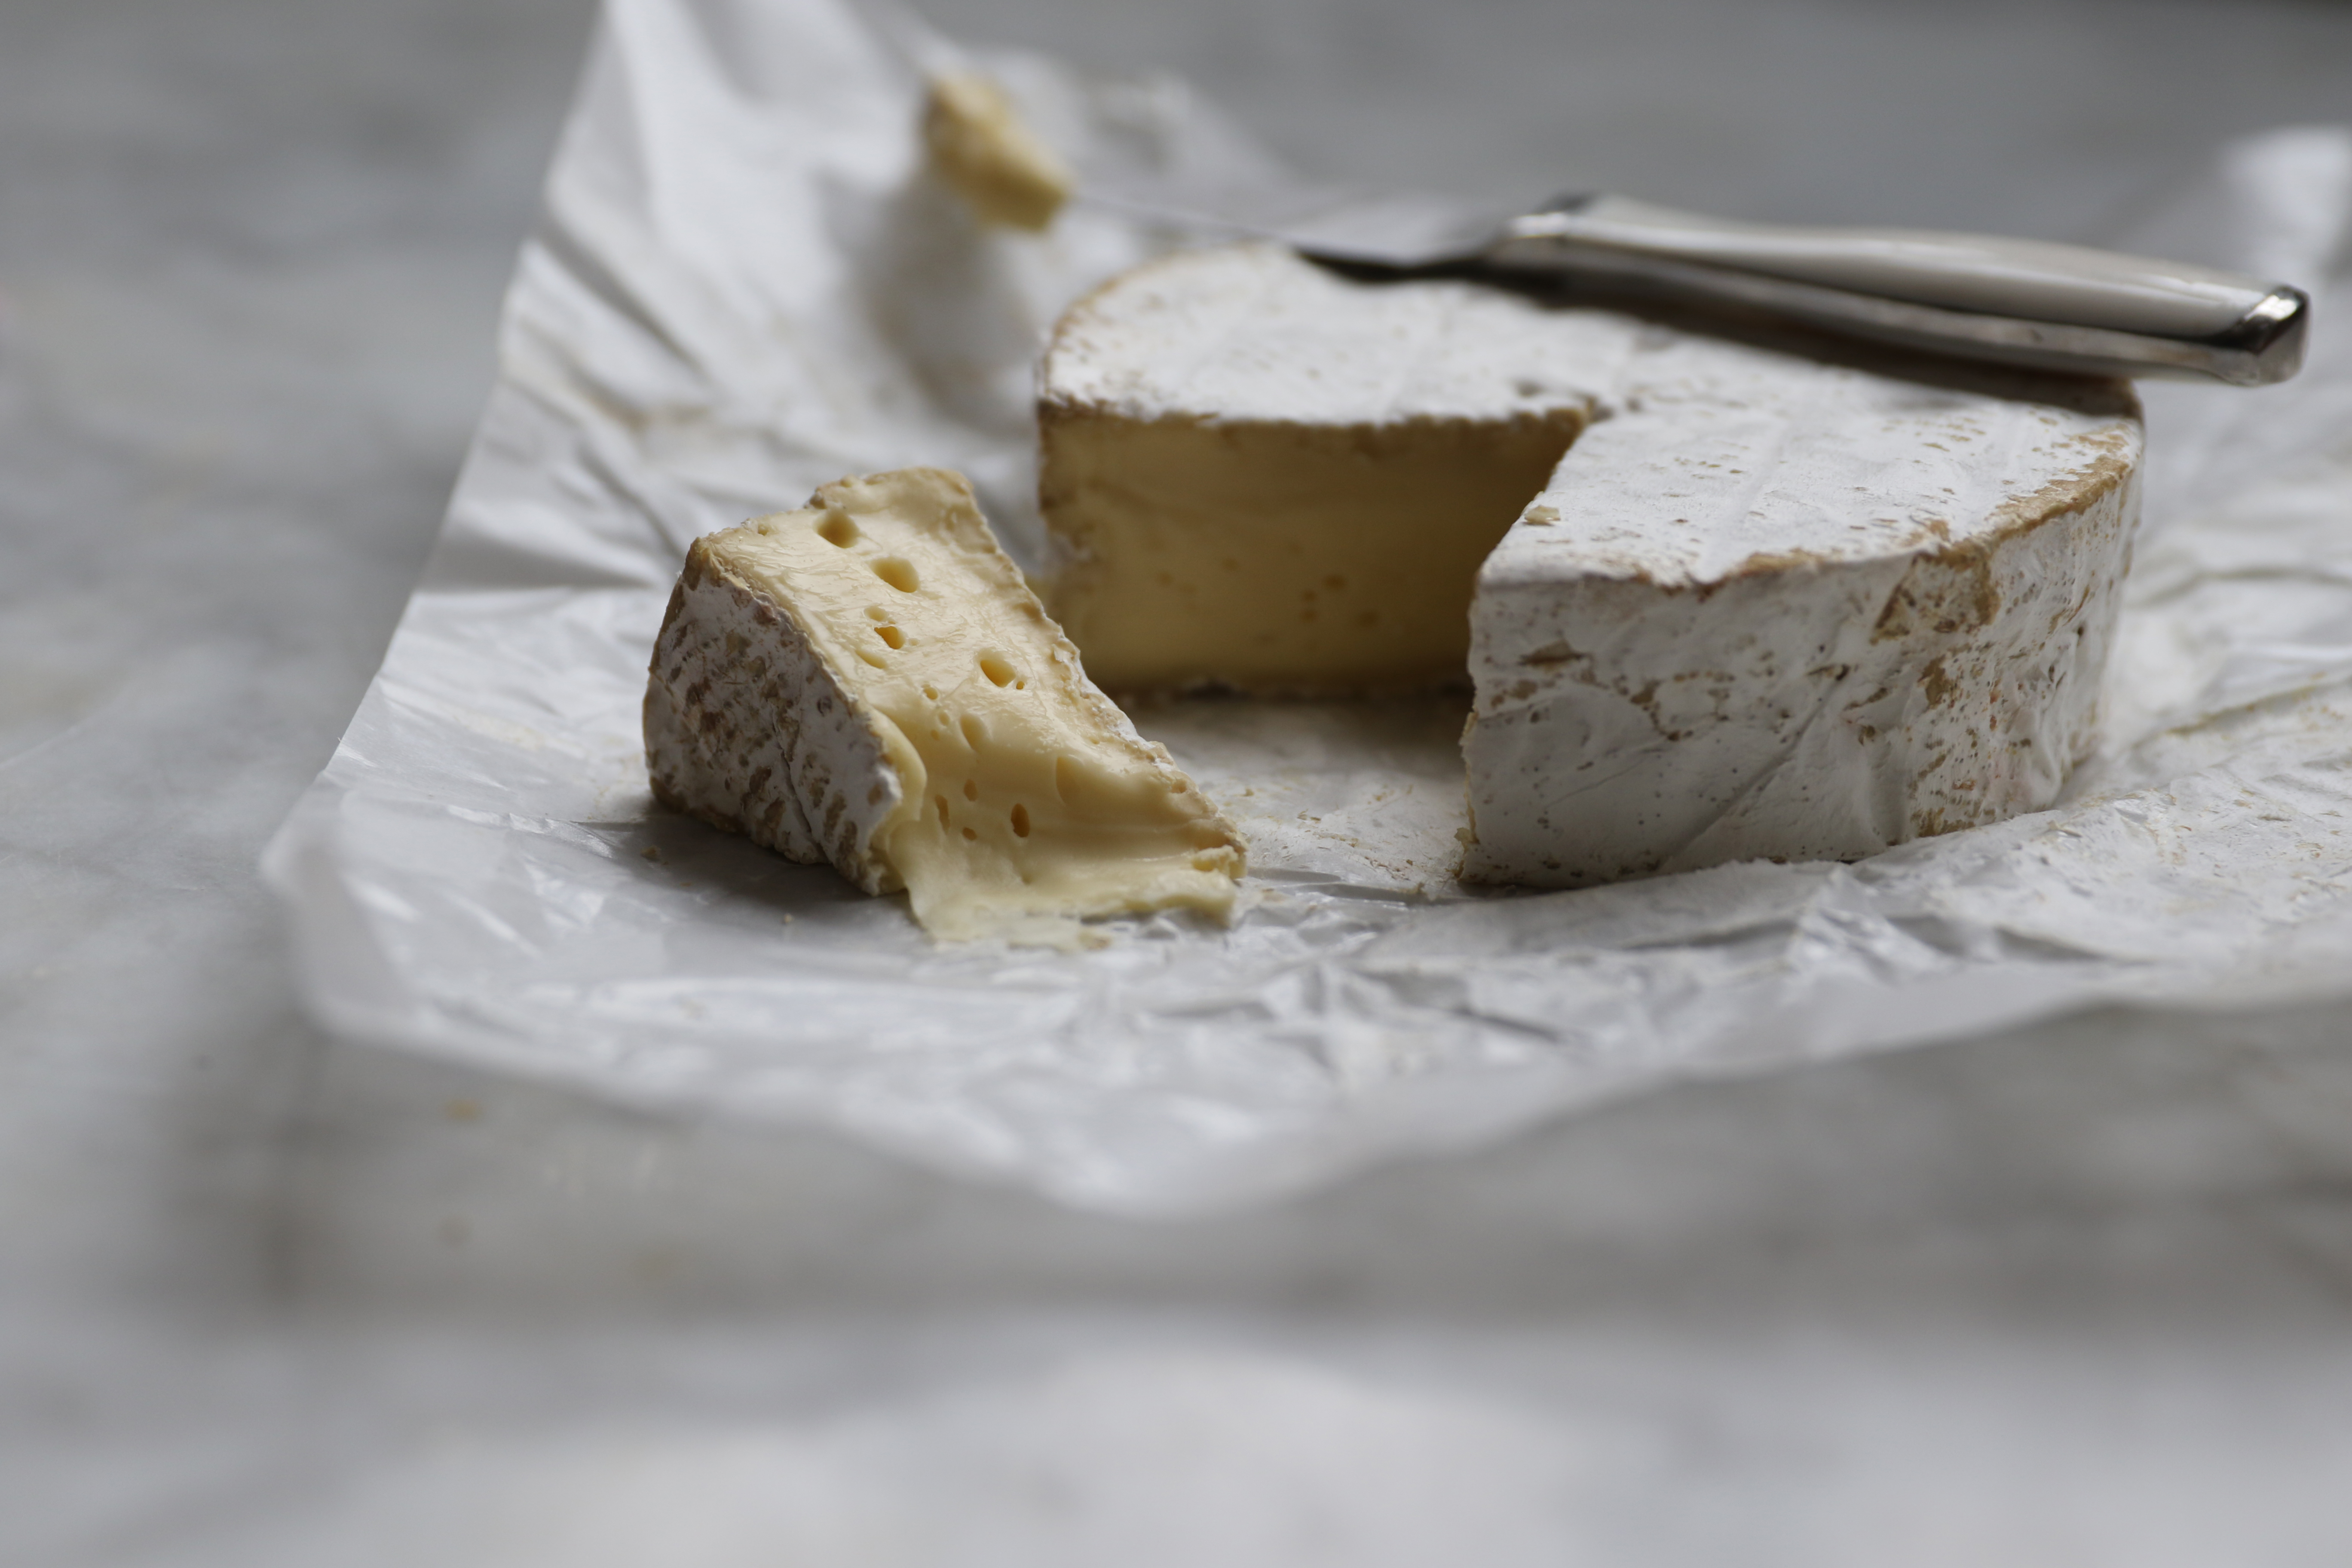 Featuring Our French Faves for Cheese Week!